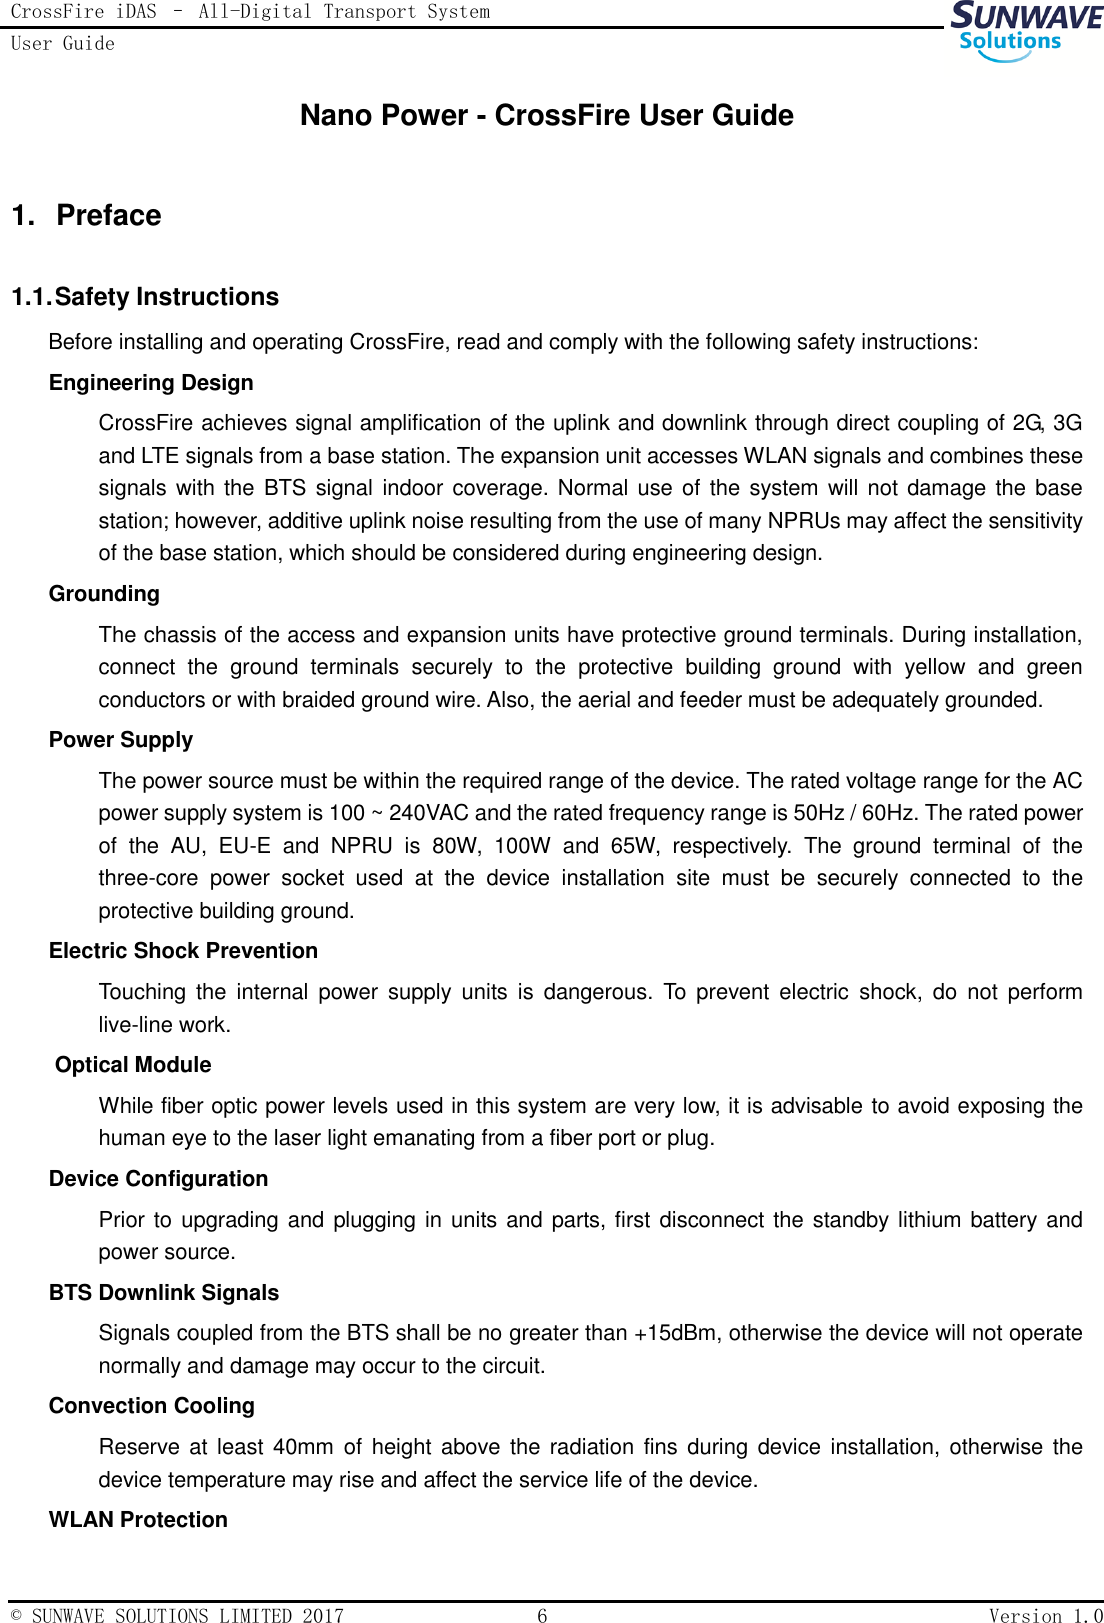 CrossFire iDAS – All-Digital Transport System User Guide   © SUNWAVE SOLUTIONS LIMITED 2017  6  Version 1.0  Nano Power - CrossFire User Guide 1.  Preface 1.1. Safety Instructions Before installing and operating CrossFire, read and comply with the following safety instructions: Engineering Design   CrossFire achieves signal amplification of the uplink and downlink through direct coupling of 2G, 3G and LTE signals from a base station. The expansion unit accesses WLAN signals and combines these signals with the BTS signal  indoor coverage. Normal use of the system will not damage the base station; however, additive uplink noise resulting from the use of many NPRUs may affect the sensitivity of the base station, which should be considered during engineering design. Grounding   The chassis of the access and expansion units have protective ground terminals. During installation, connect  the  ground  terminals  securely  to  the  protective  building  ground  with  yellow  and  green conductors or with braided ground wire. Also, the aerial and feeder must be adequately grounded. Power Supply   The power source must be within the required range of the device. The rated voltage range for the AC power supply system is 100 ~ 240VAC and the rated frequency range is 50Hz / 60Hz. The rated power of  the  AU,  EU-E  and  NPRU  is  80W,  100W  and  65W,  respectively.  The  ground  terminal  of  the three-core  power  socket  used  at  the  device  installation  site  must  be  securely  connected  to  the protective building ground. Electric Shock Prevention   Touching  the  internal  power  supply  units  is  dangerous.  To  prevent  electric  shock,  do  not  perform live-line work. Optical Module While fiber optic power levels used in this system are very low, it is advisable to avoid exposing the human eye to the laser light emanating from a fiber port or plug. Device Configuration   Prior to upgrading and  plugging in units and parts, first disconnect the standby lithium battery and power source. BTS Downlink Signals Signals coupled from the BTS shall be no greater than +15dBm, otherwise the device will not operate normally and damage may occur to the circuit.   Convection Cooling Reserve at least  40mm  of  height above the  radiation  fins  during  device installation, otherwise the device temperature may rise and affect the service life of the device. WLAN Protection 